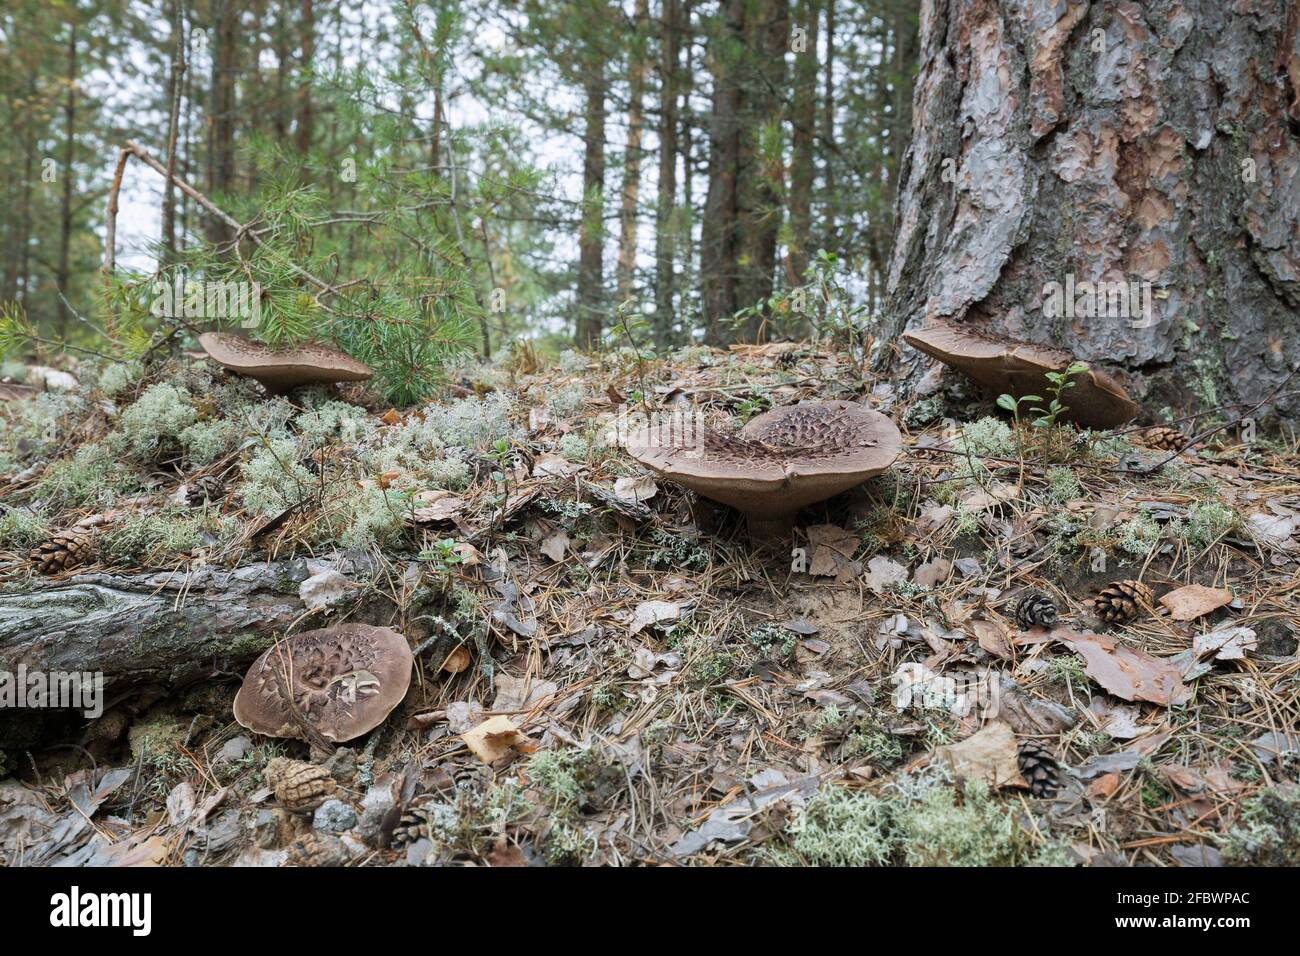 Scaly tooth fungus, Sarcodon squamosus growing in pine forest Stock Photo